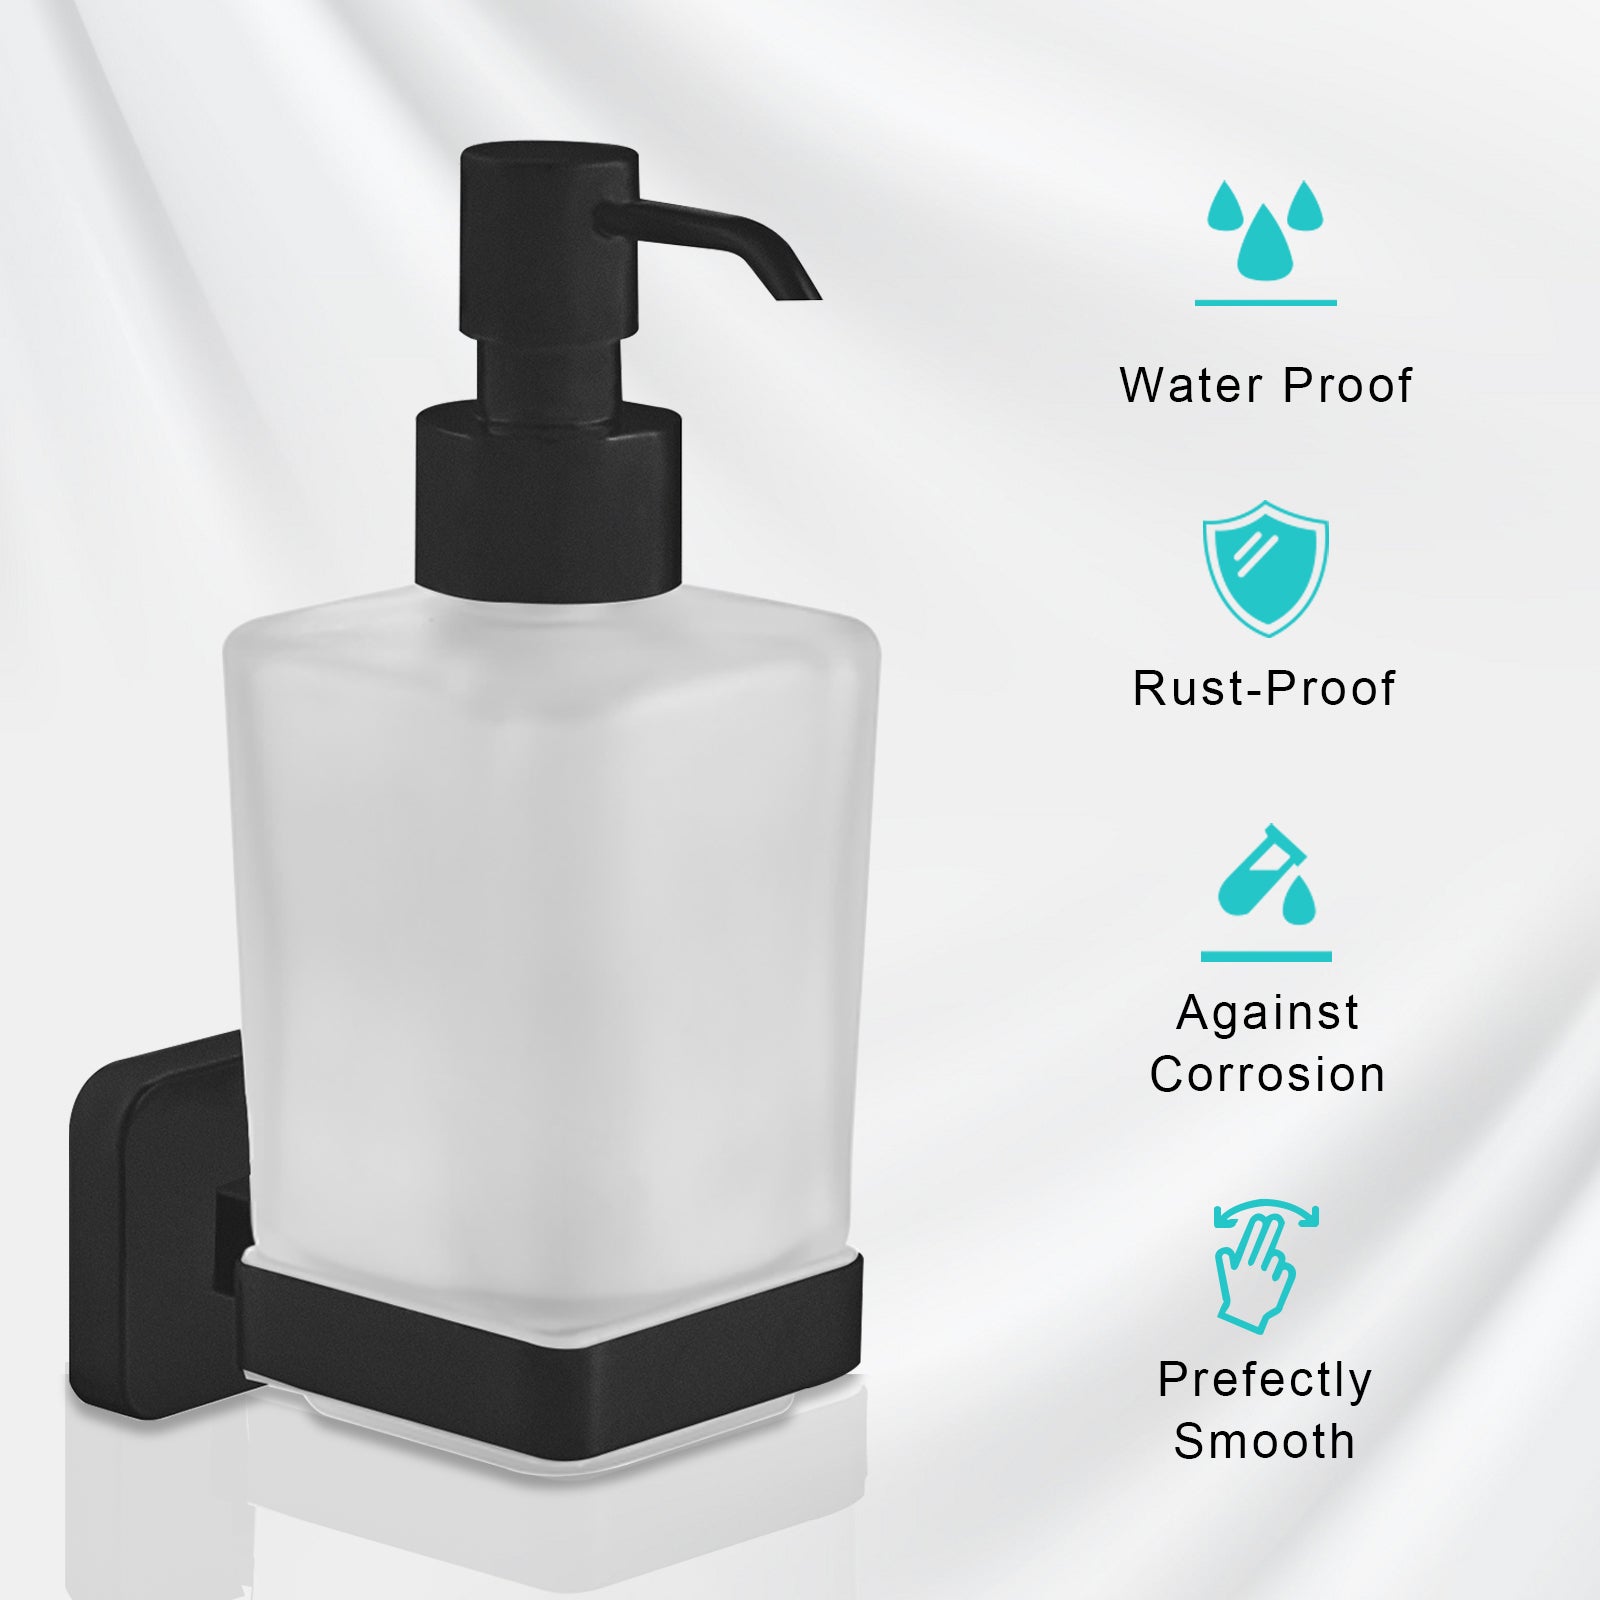 JassferryJASSFERRY Black Wall Mounted Soap Dispenser and Square Holder Frosted Glass Lotion Dispenser SetSoap Dispenser